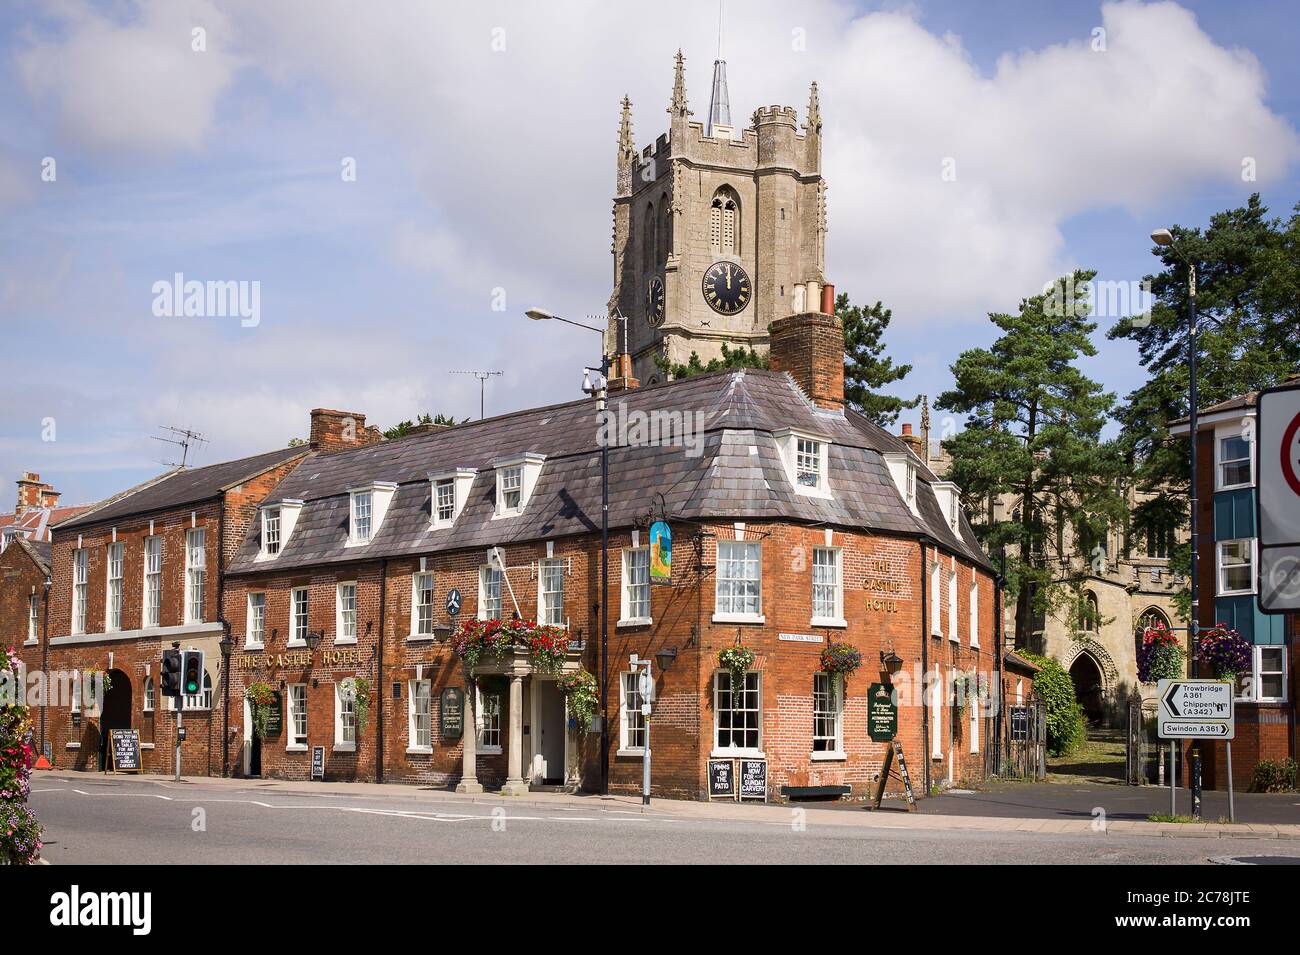 The Castle Hotel in Devizes Wiltshire England UK with a church tower and clock in the background Stock Photo